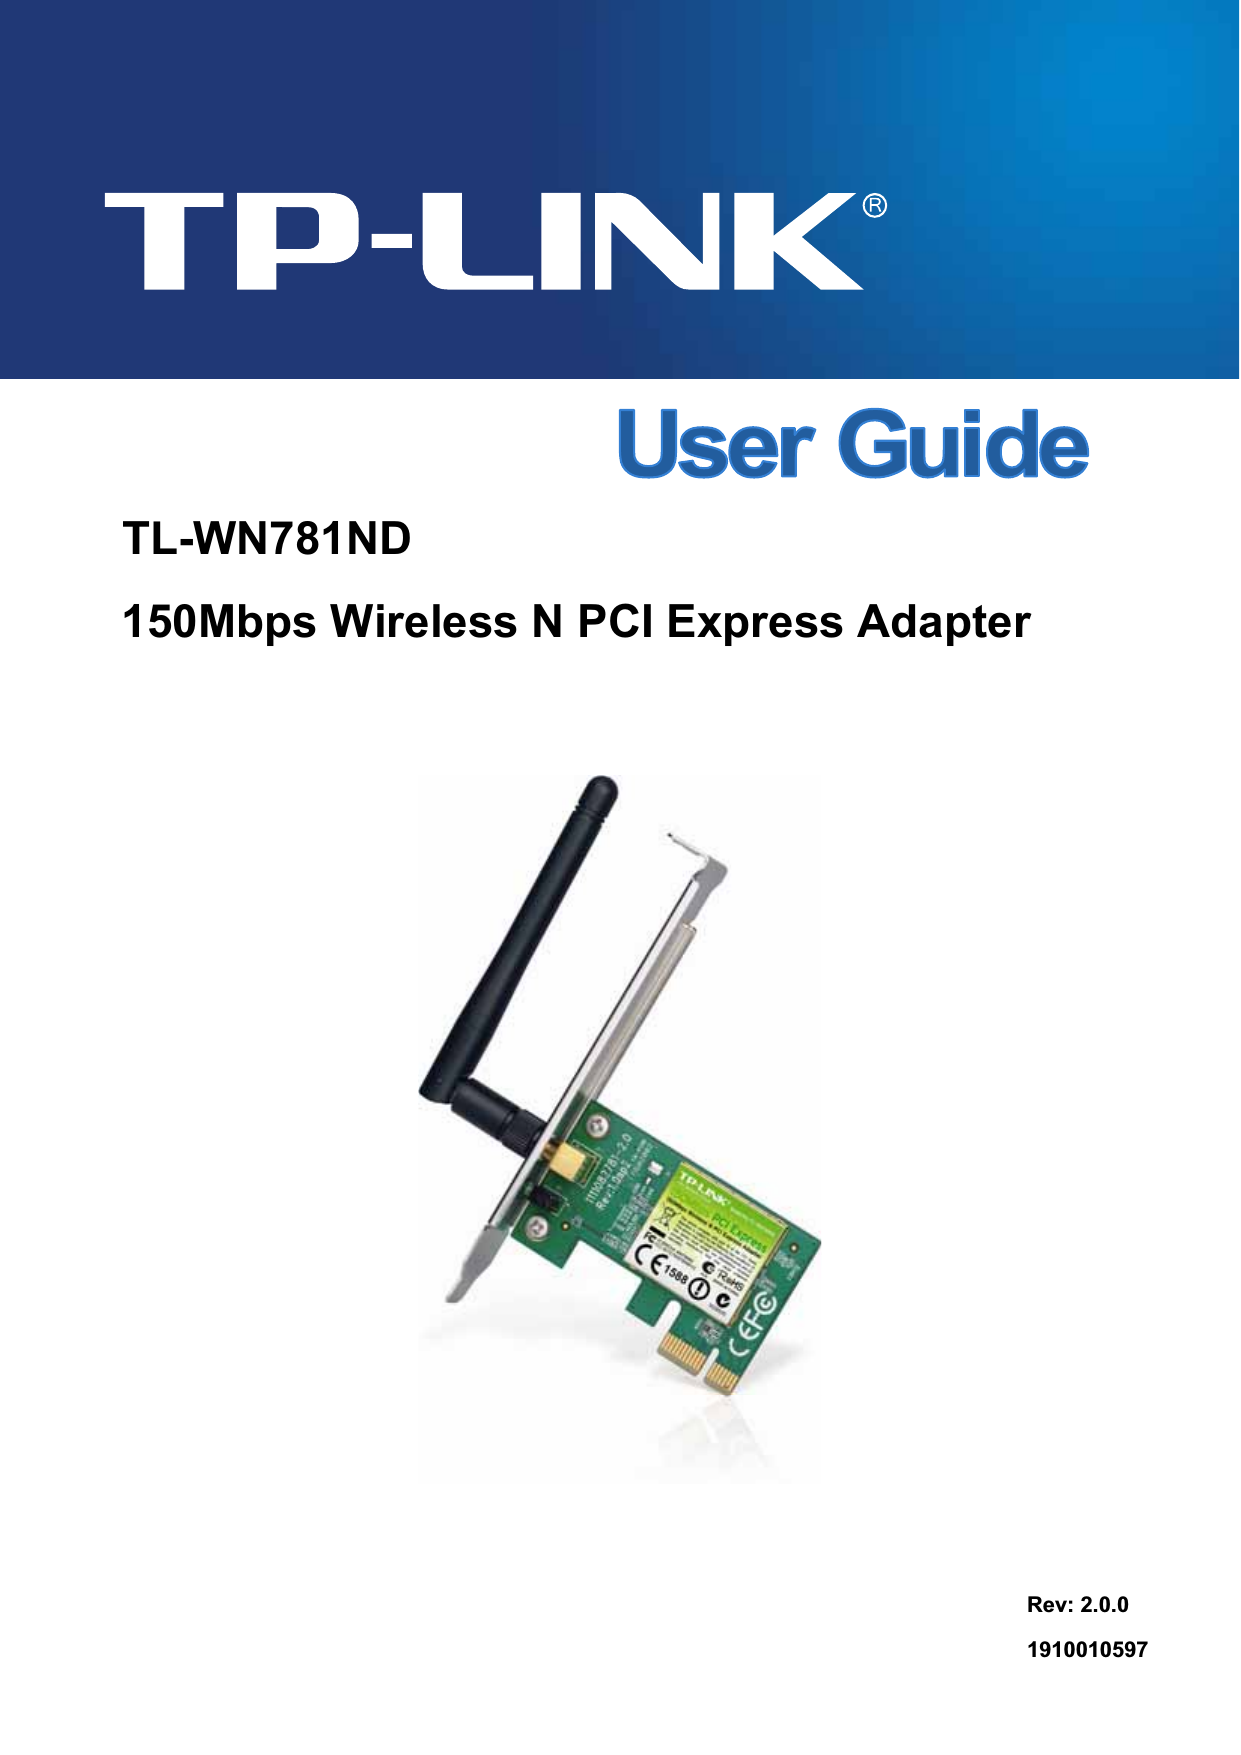    TL-WN781ND 150Mbps Wireless N PCI Express Adapter    Rev: 2.0.0 1910010597 